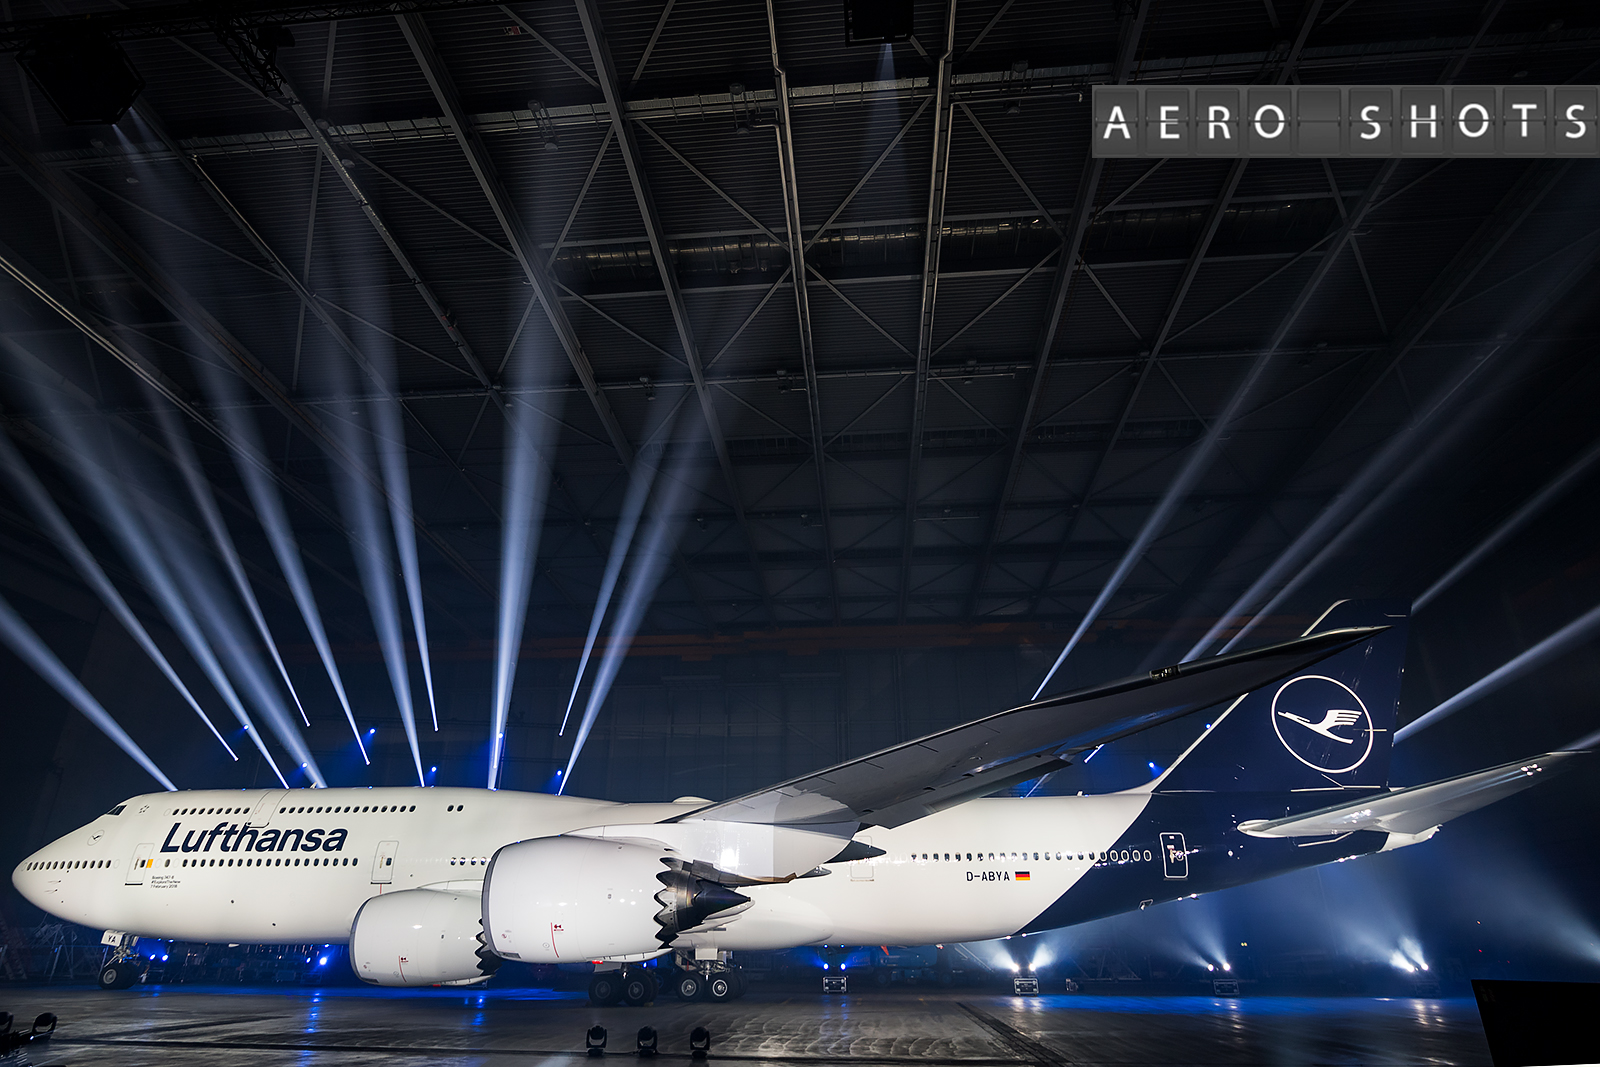 a large airplane in a hangar with bright lights